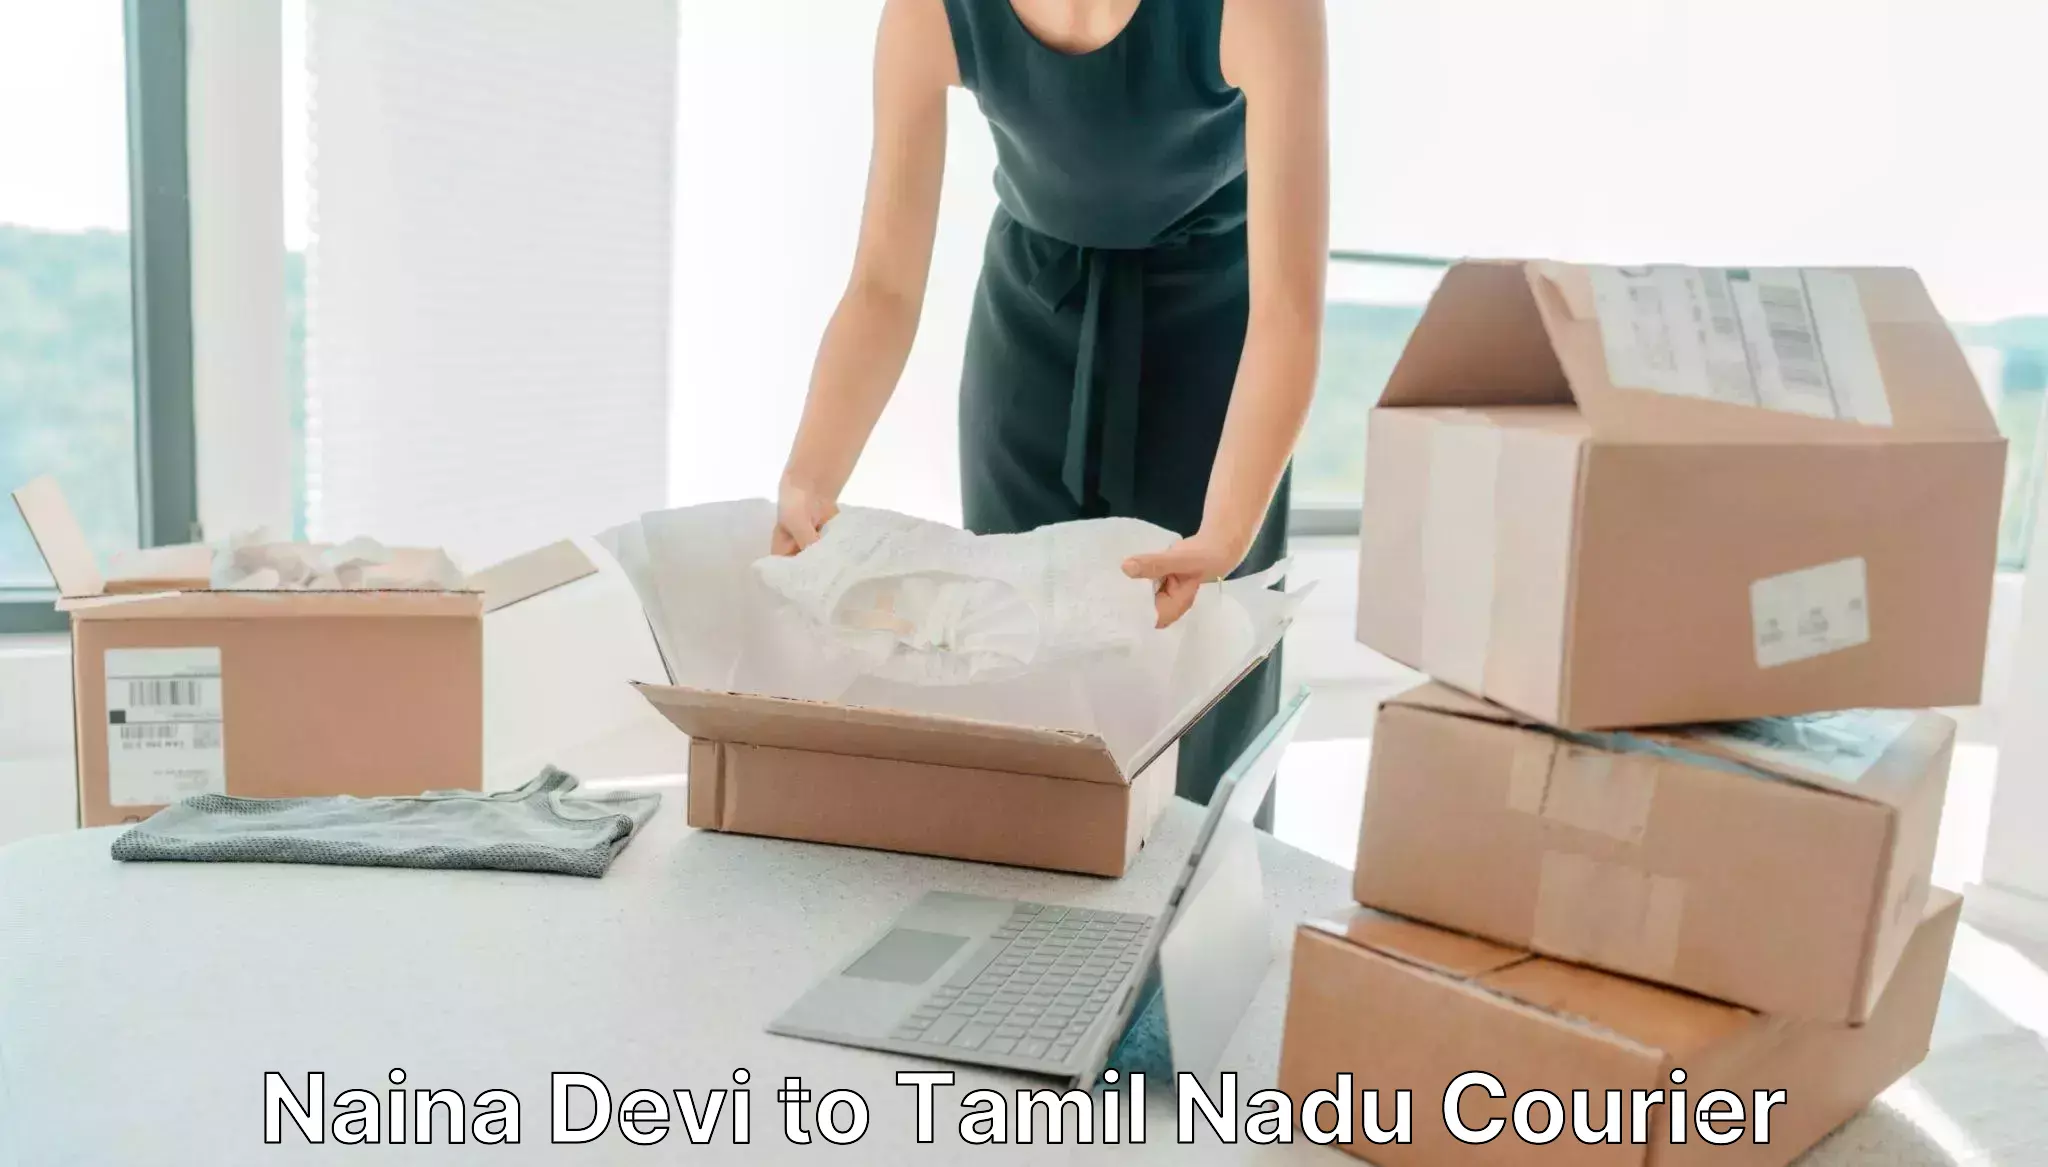 Courier service booking Naina Devi to Ambattur